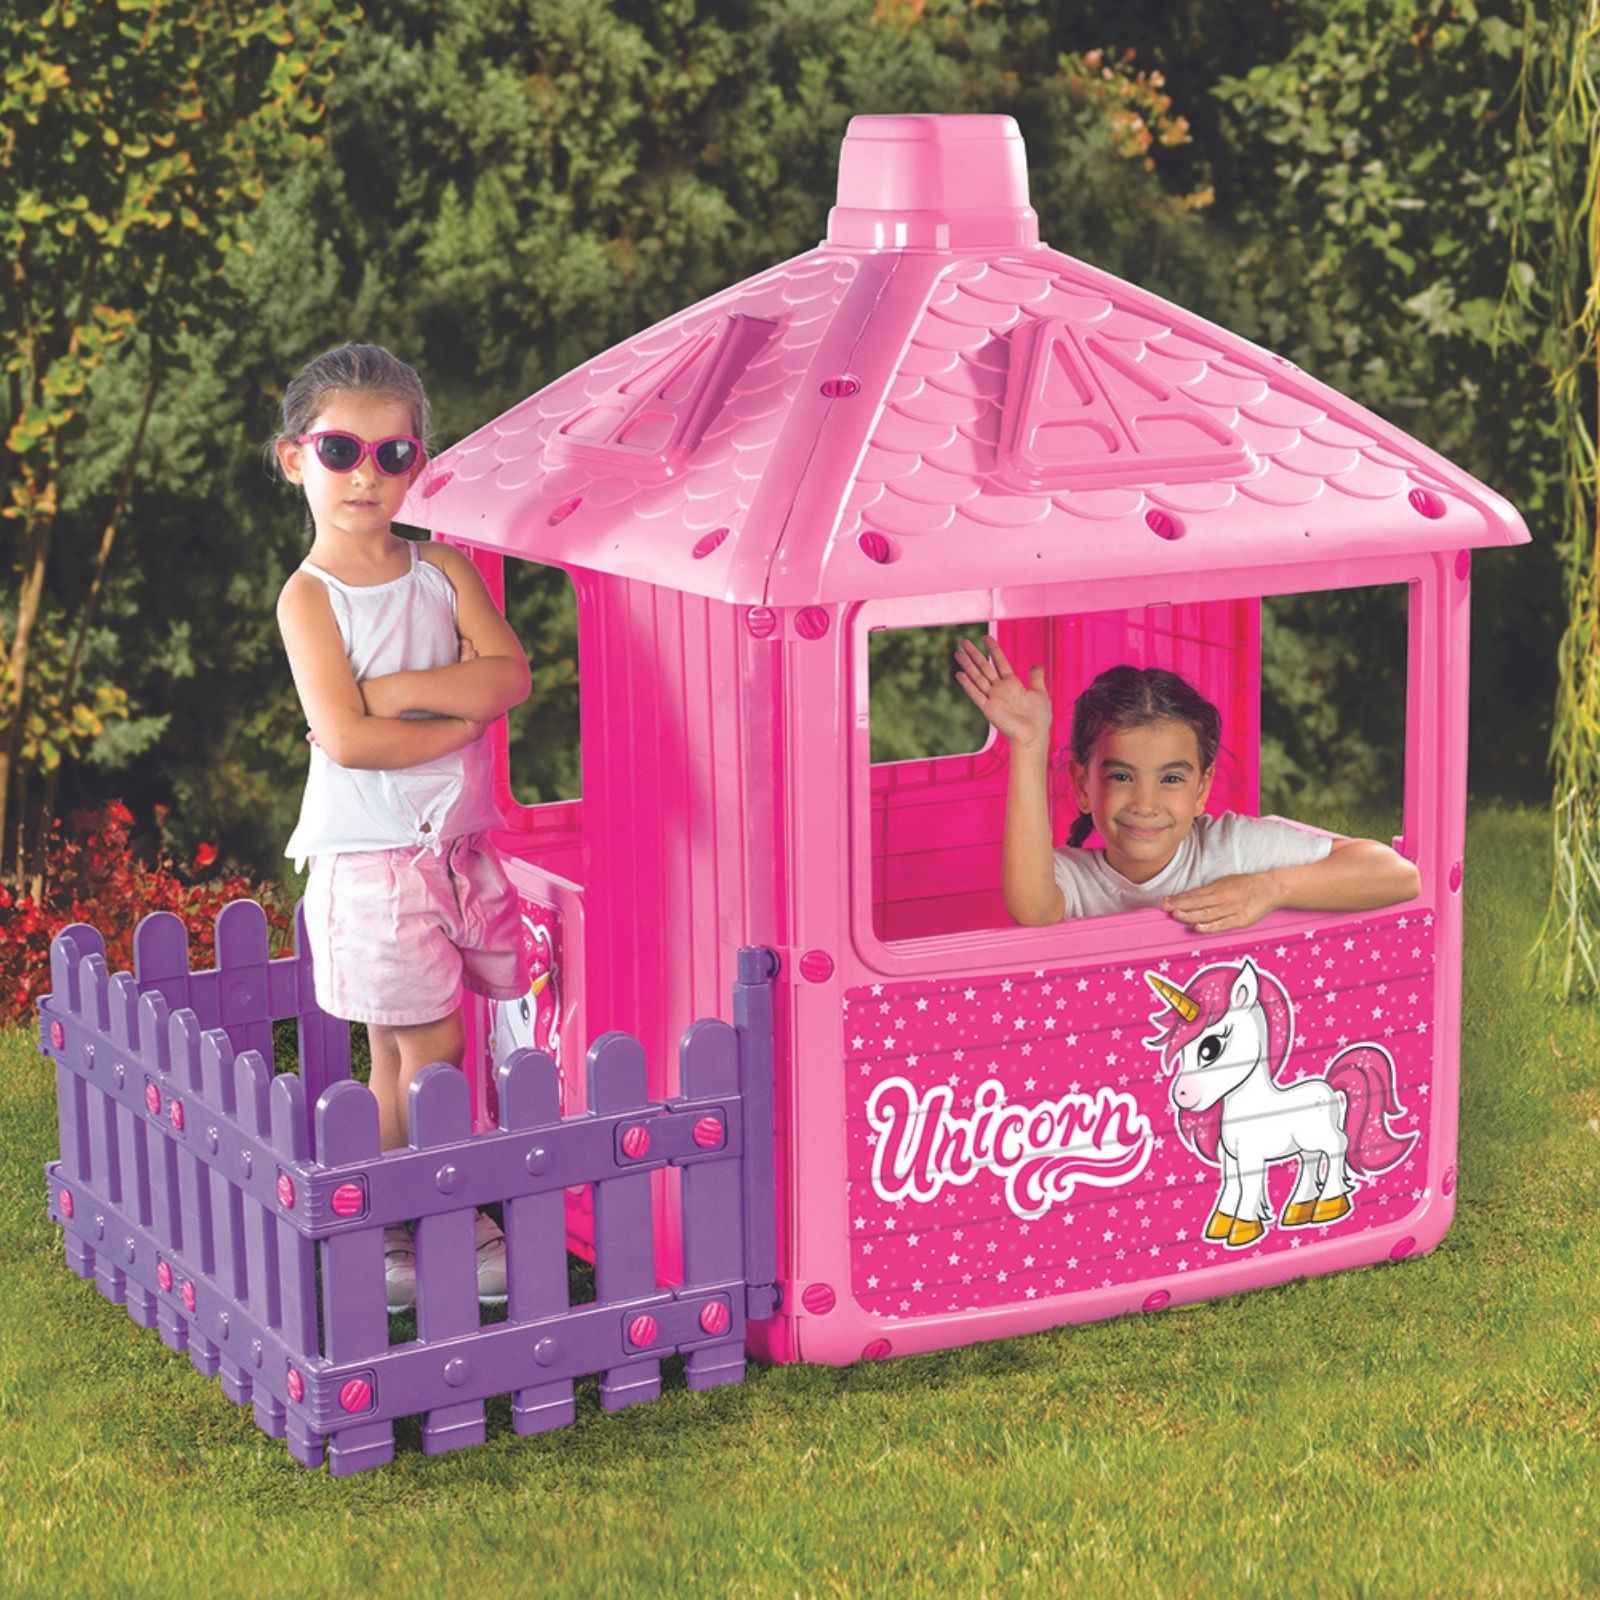 Unicorn Kids Indoor/Outdoor Playhouse with Fence - Pink